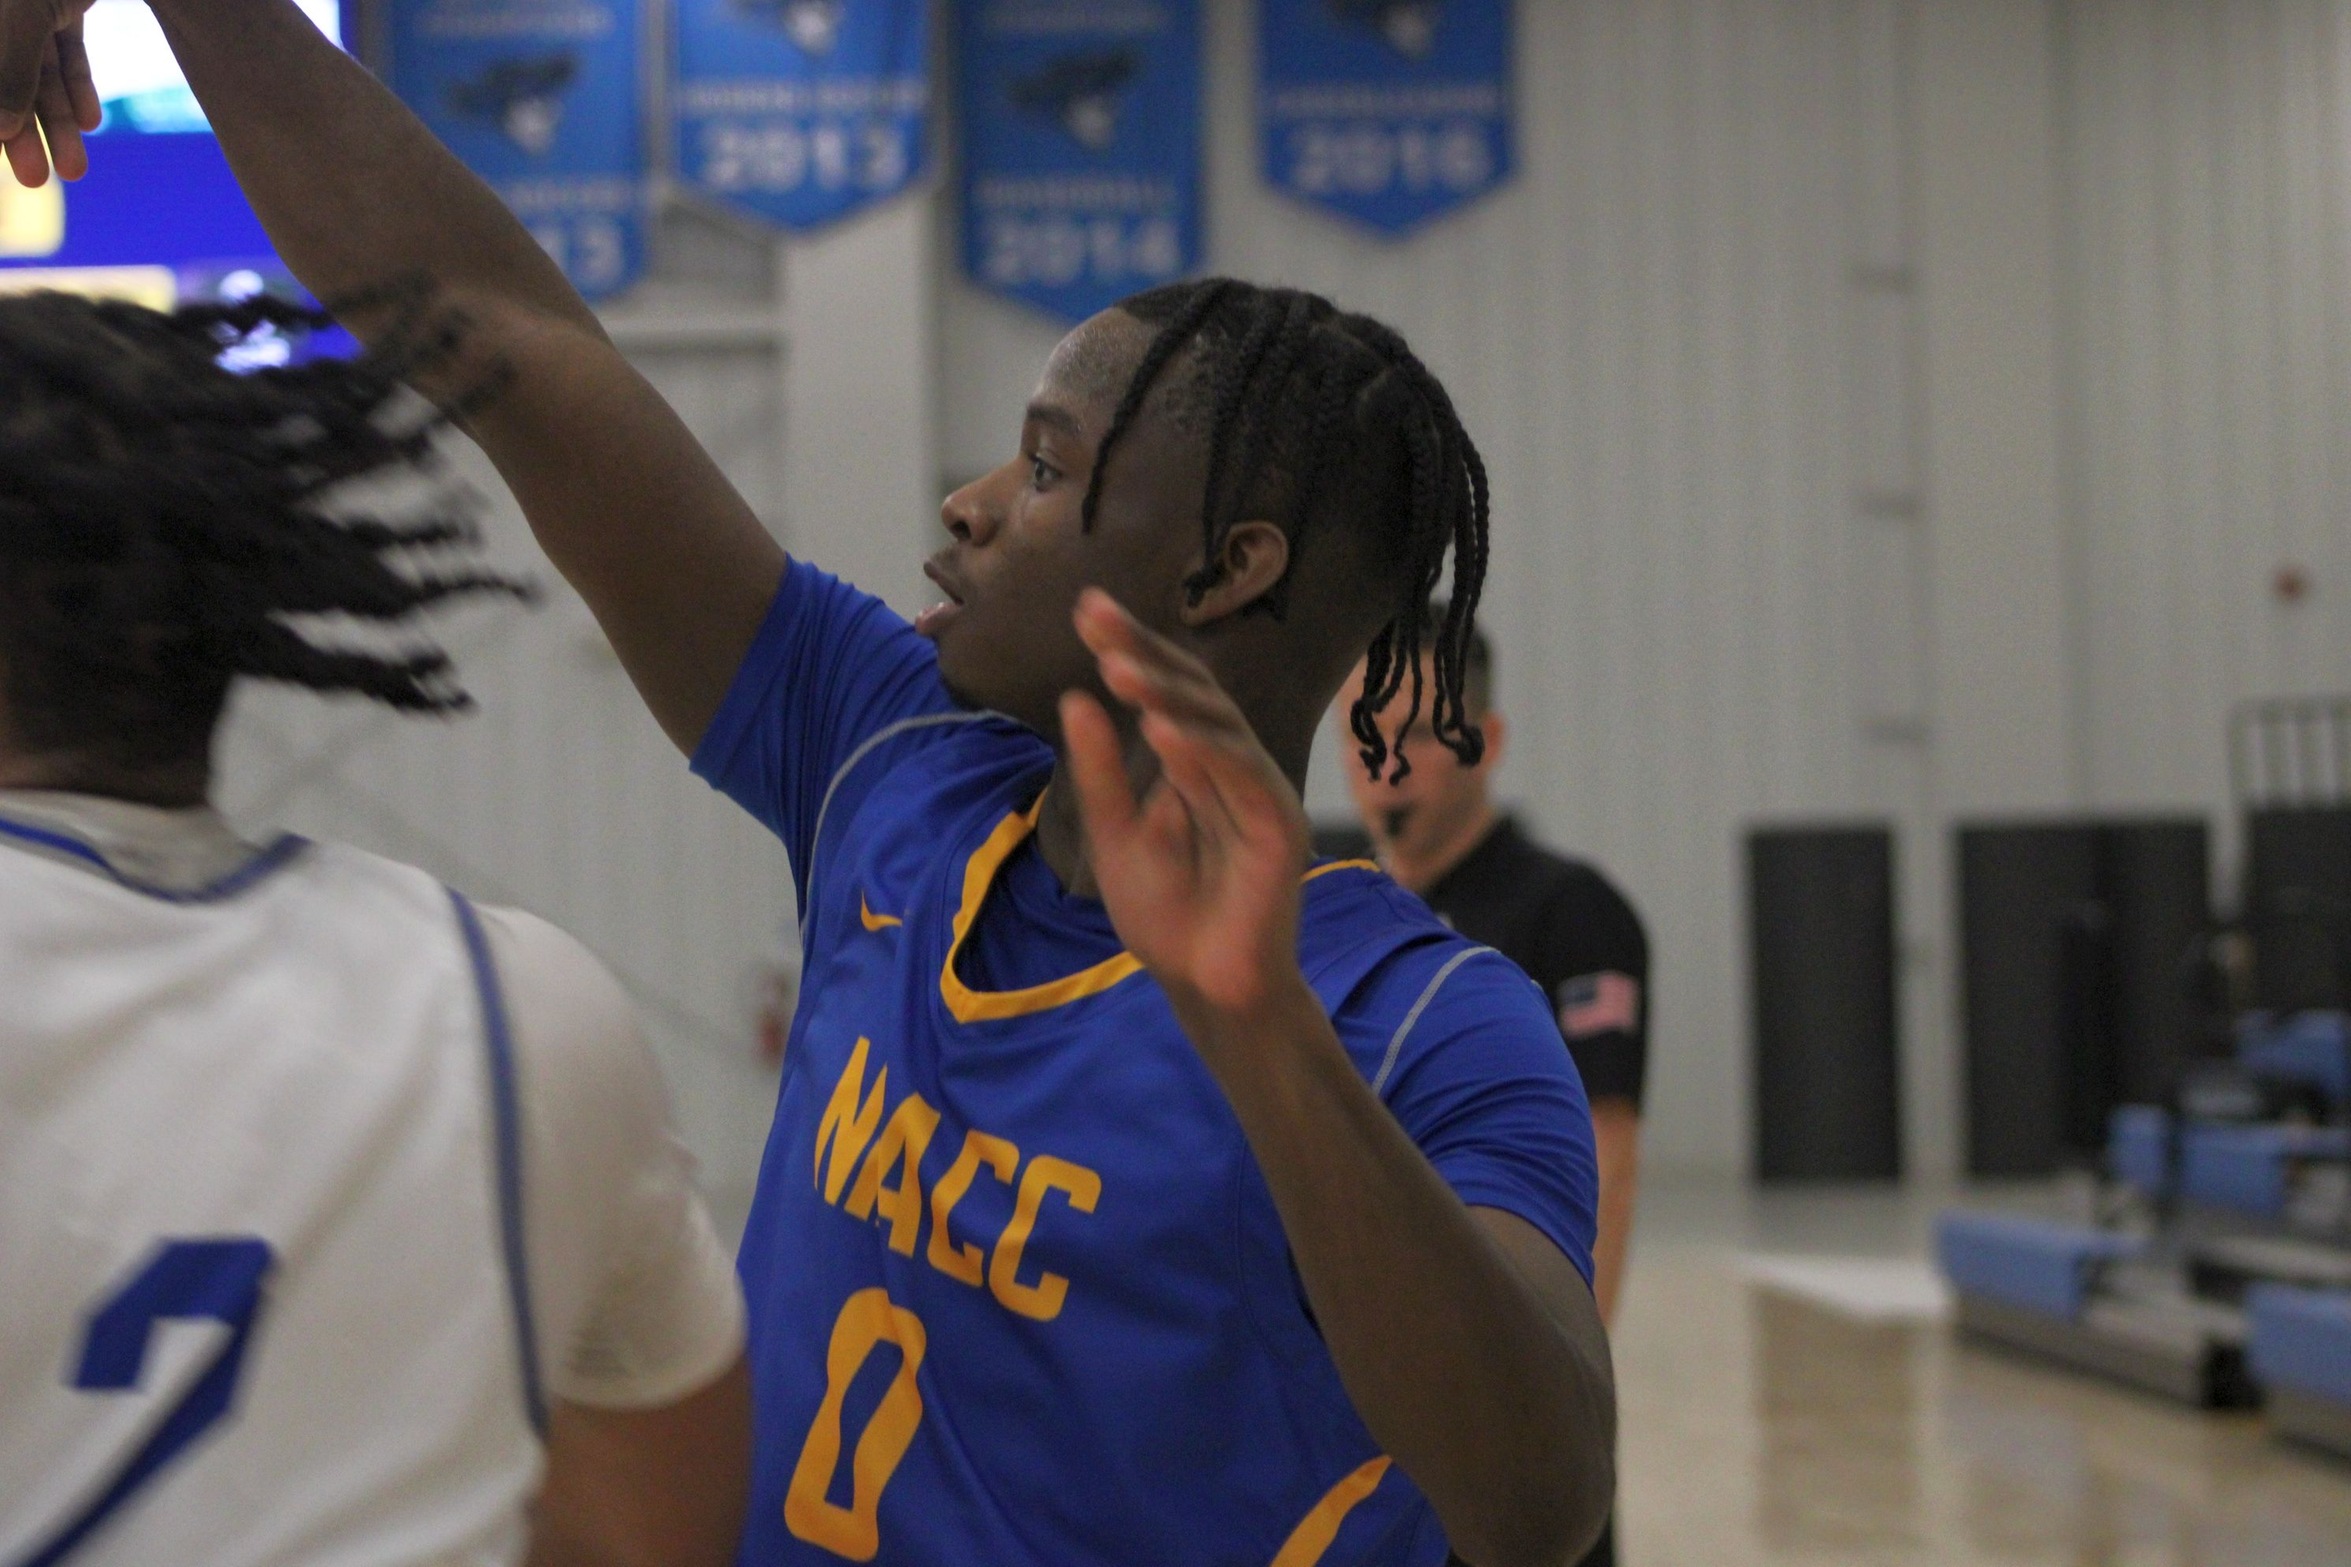 NIACC's Myles Tucker was selected as the ICCAC player of the week for the week of Jan. 2-8.